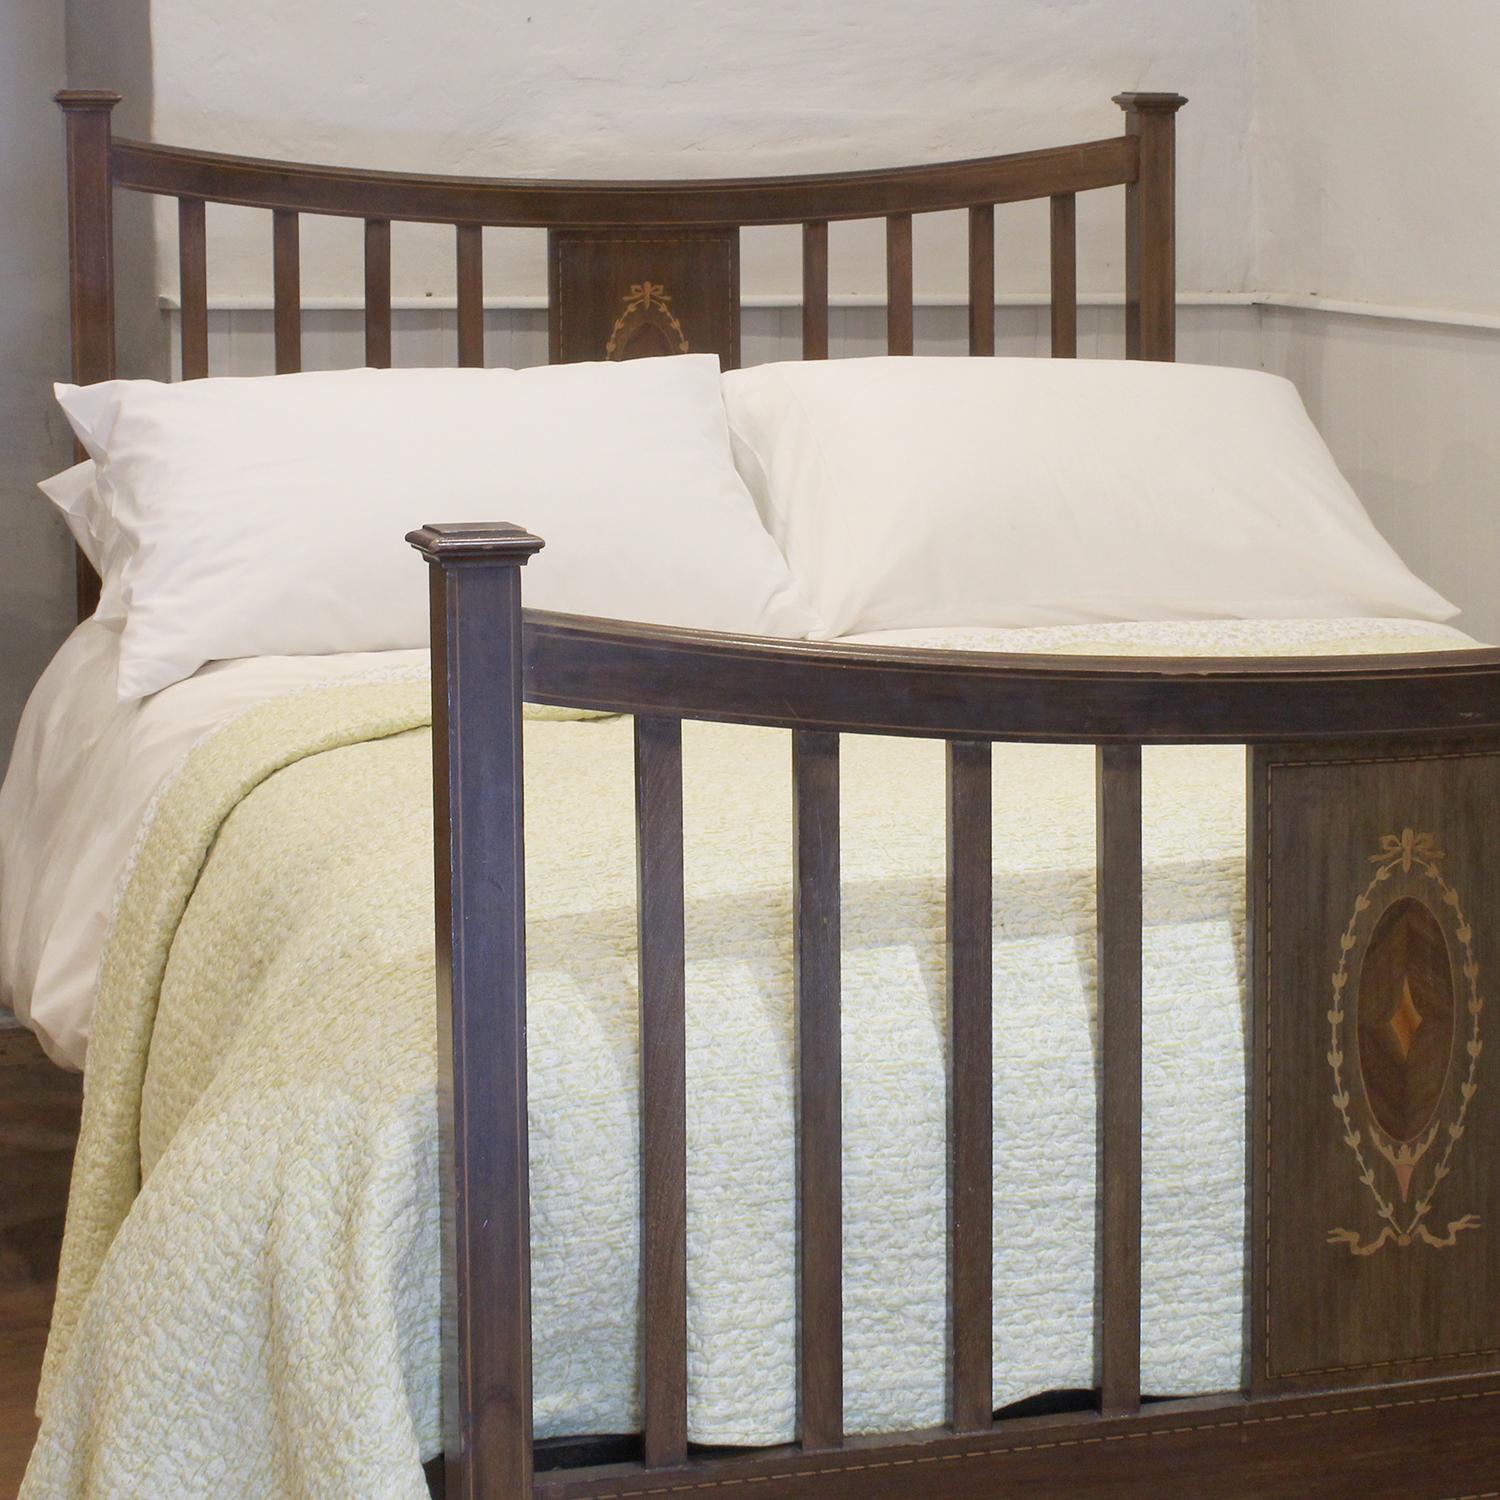 Edwardian Inlaid Double Slatted Bed, WD46